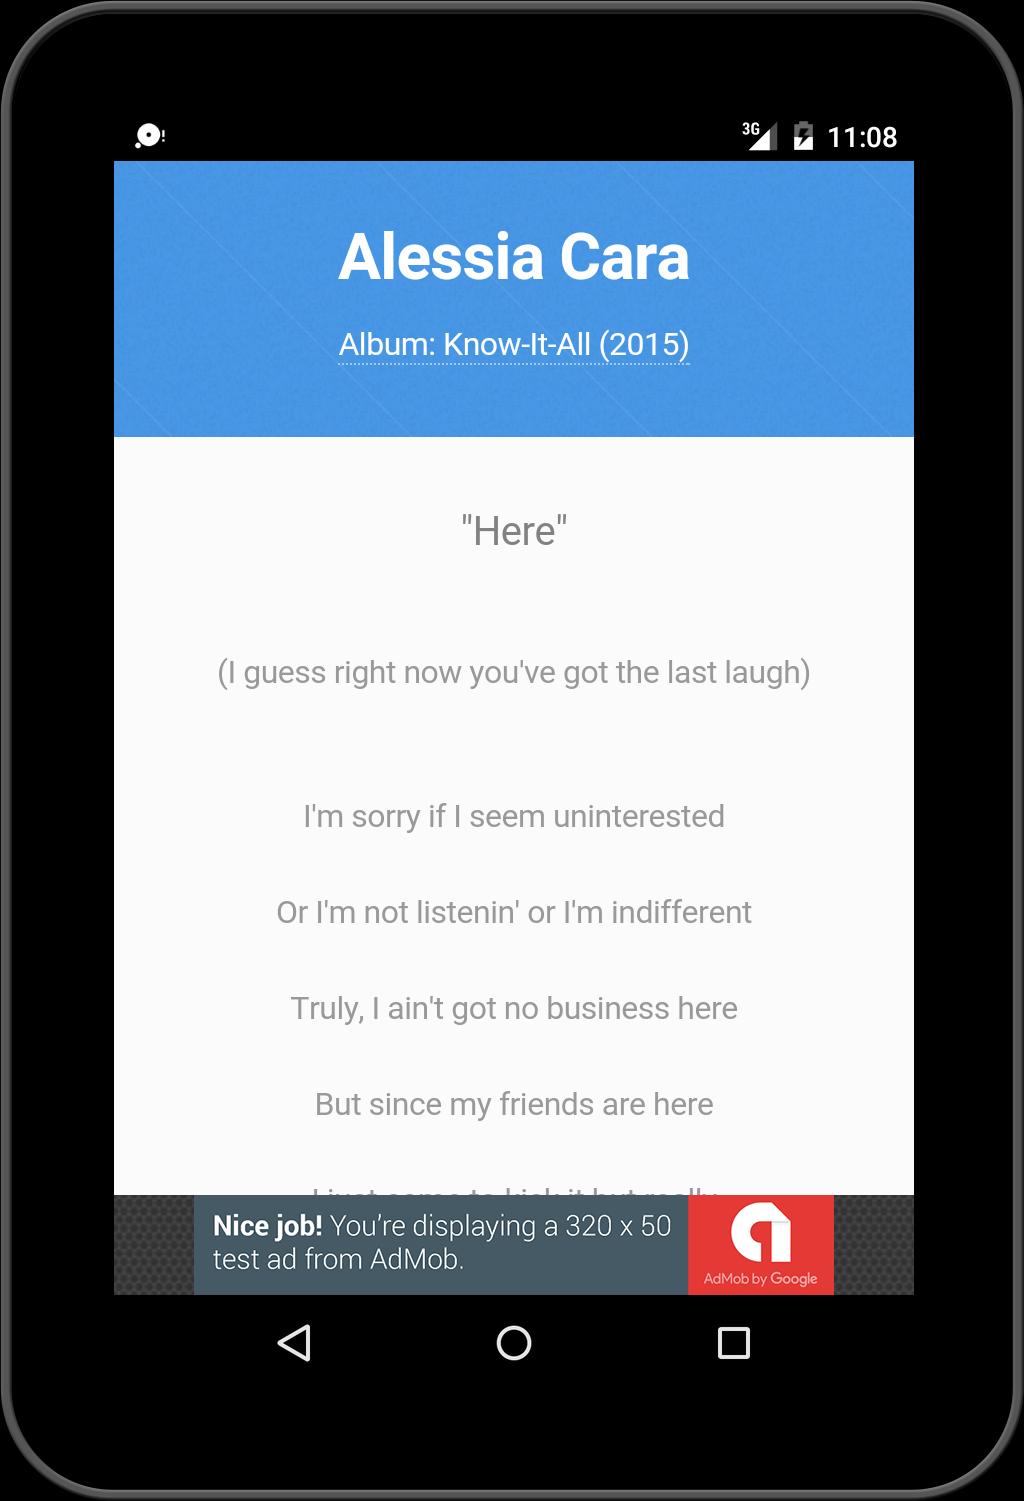 Best Music Lyric Alessia Cara for Android - APK Download